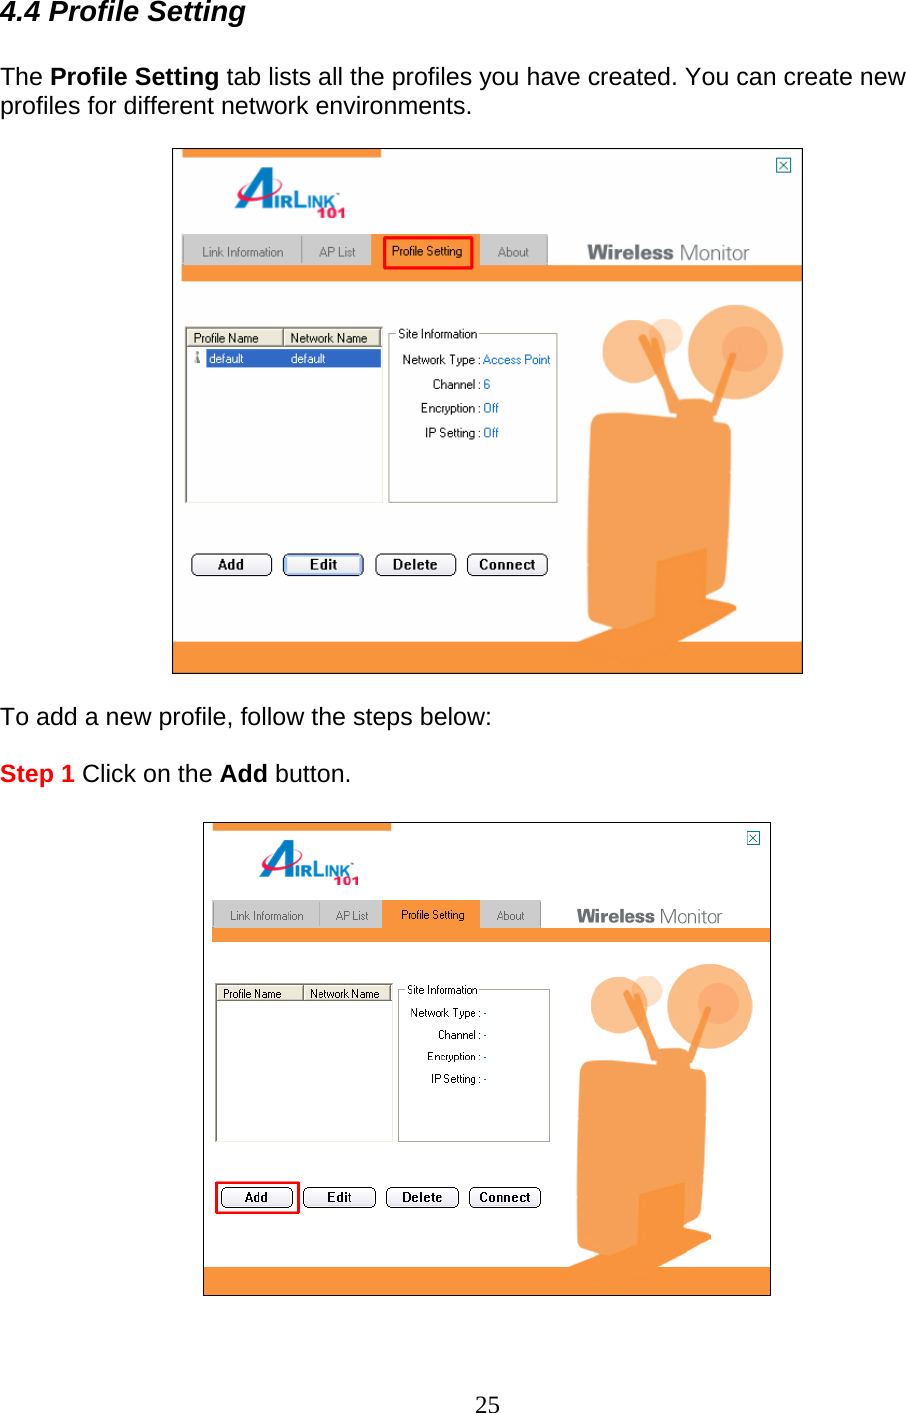 25 4.4 Profile Setting  The Profile Setting tab lists all the profiles you have created. You can create new profiles for different network environments.    To add a new profile, follow the steps below:  Step 1 Click on the Add button.    